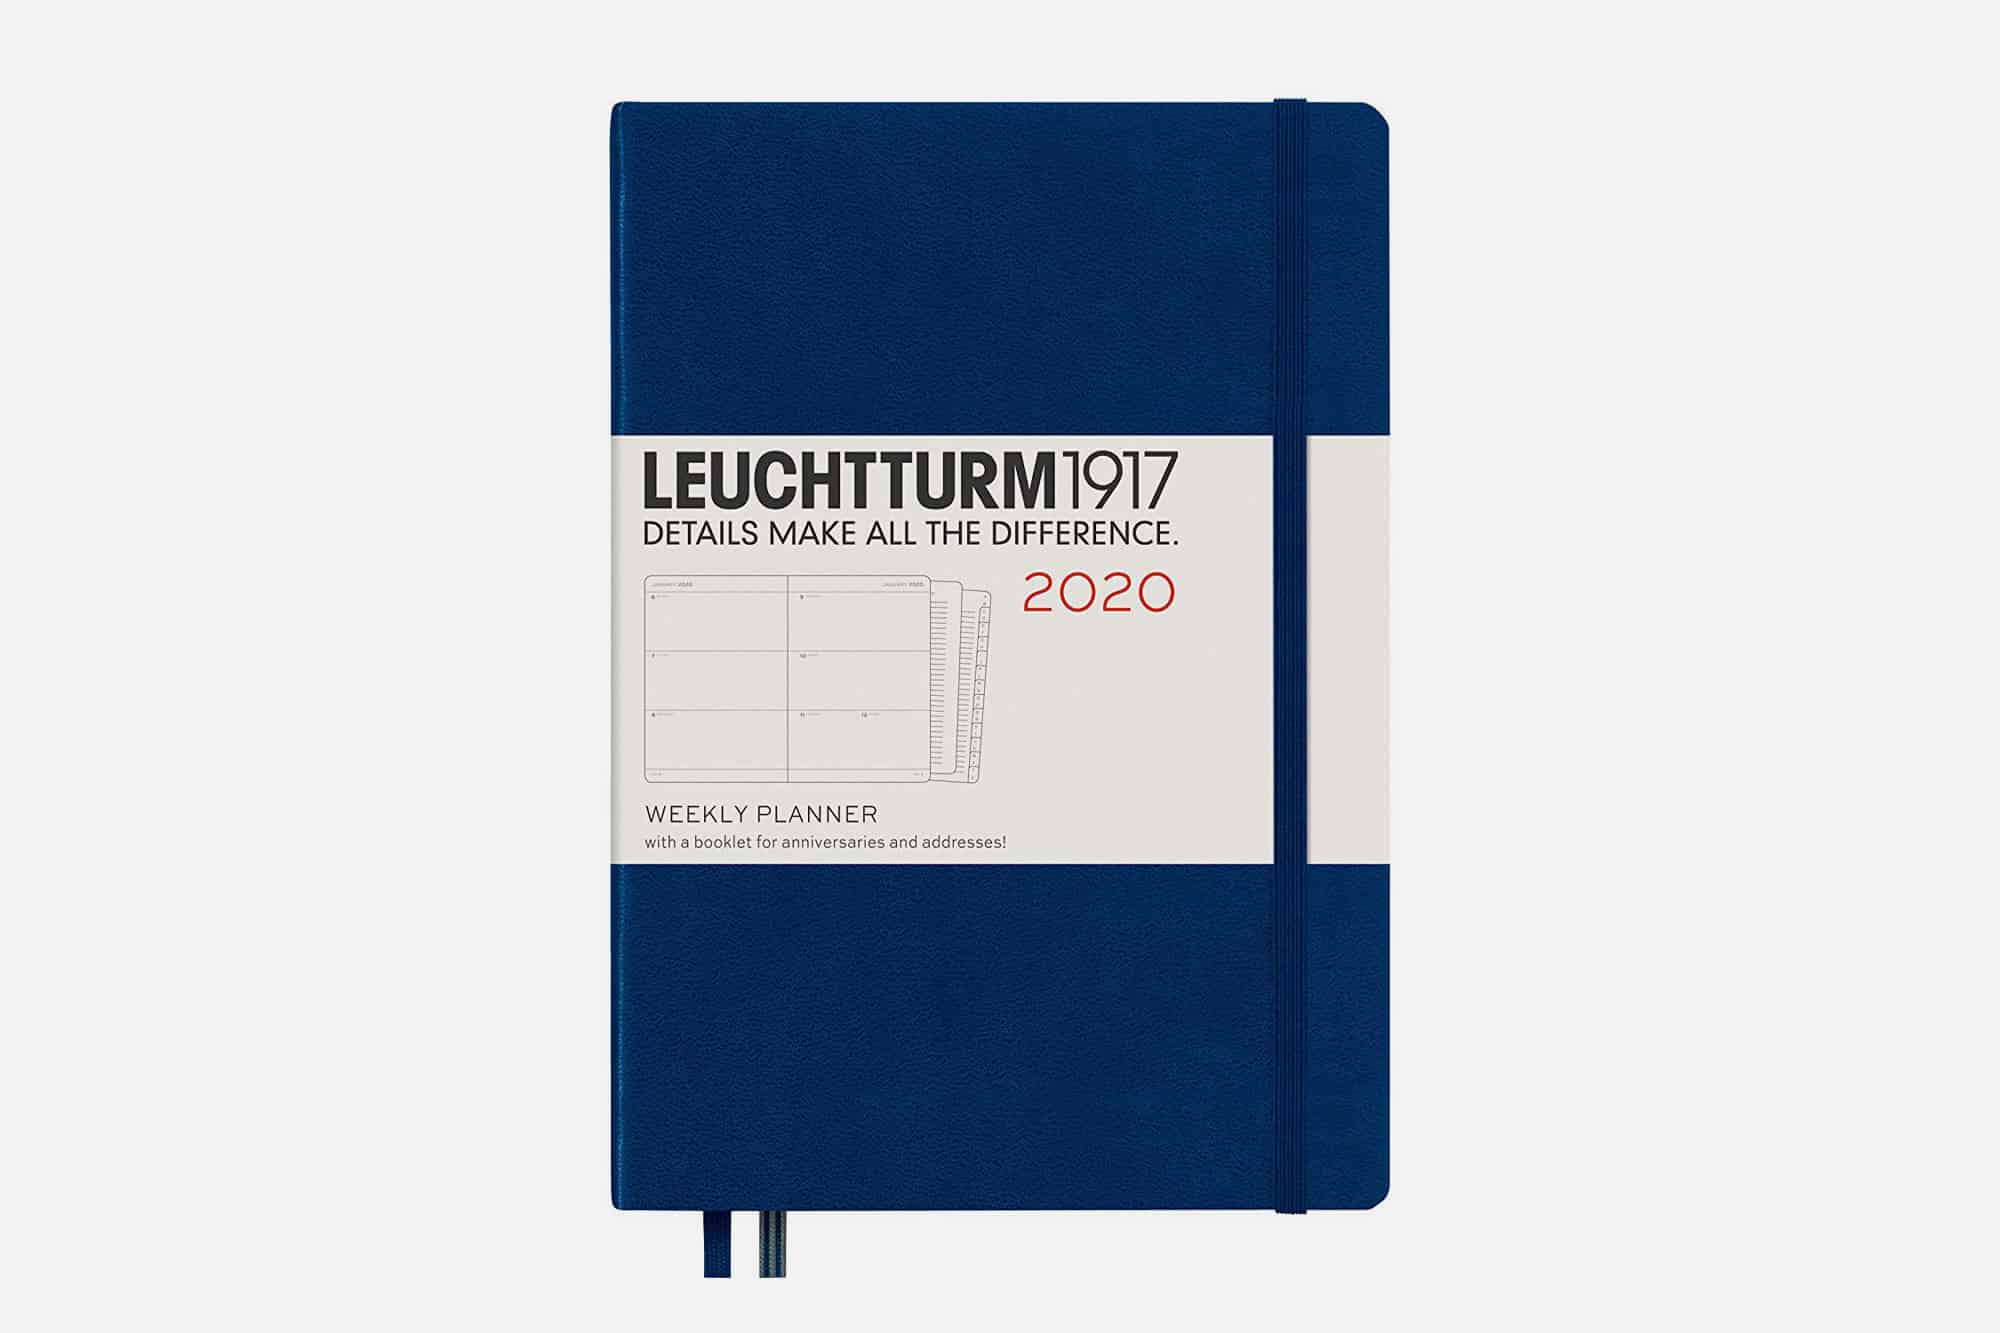 Lechtturm planner - Watches, Stories, and Gear: A Real Spy Watch from the Cold W...